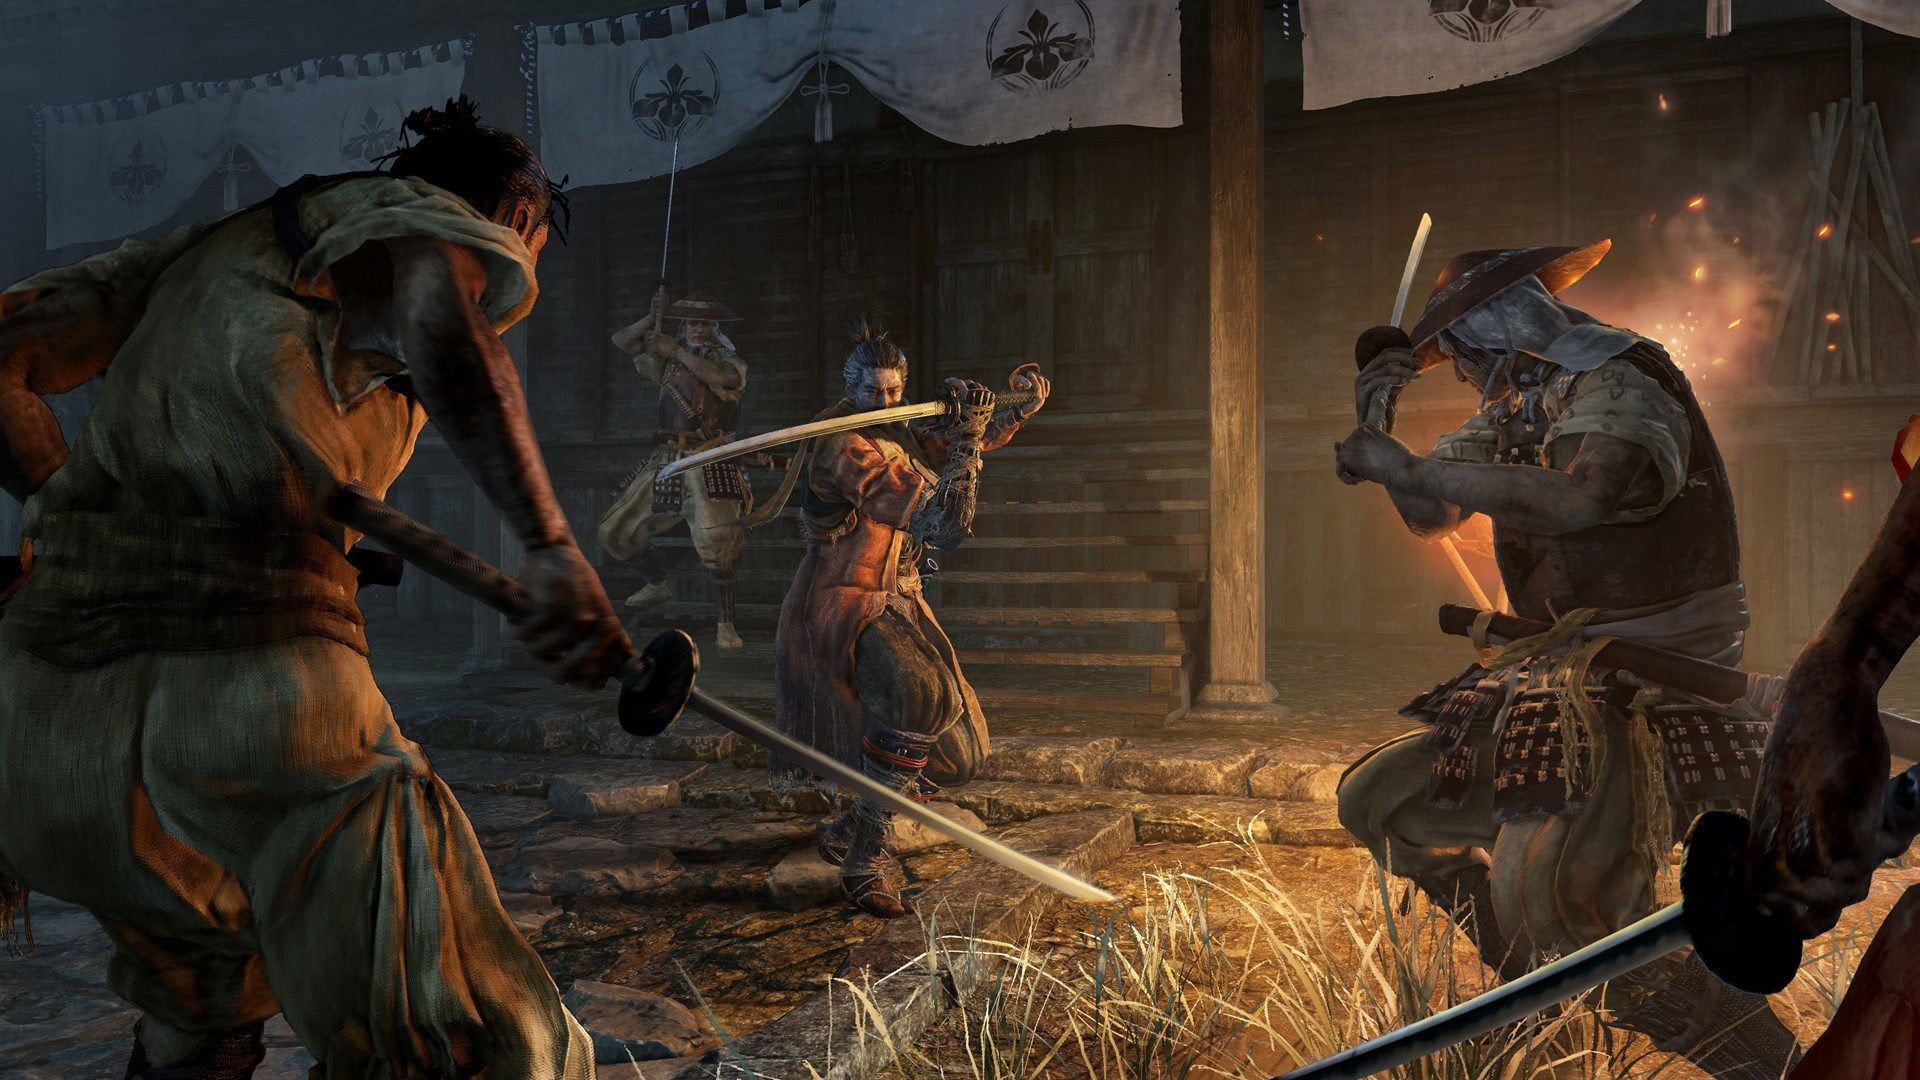 This Player Made Mod Brings An Easy Mode To Sekiro: Shadows Die Twice